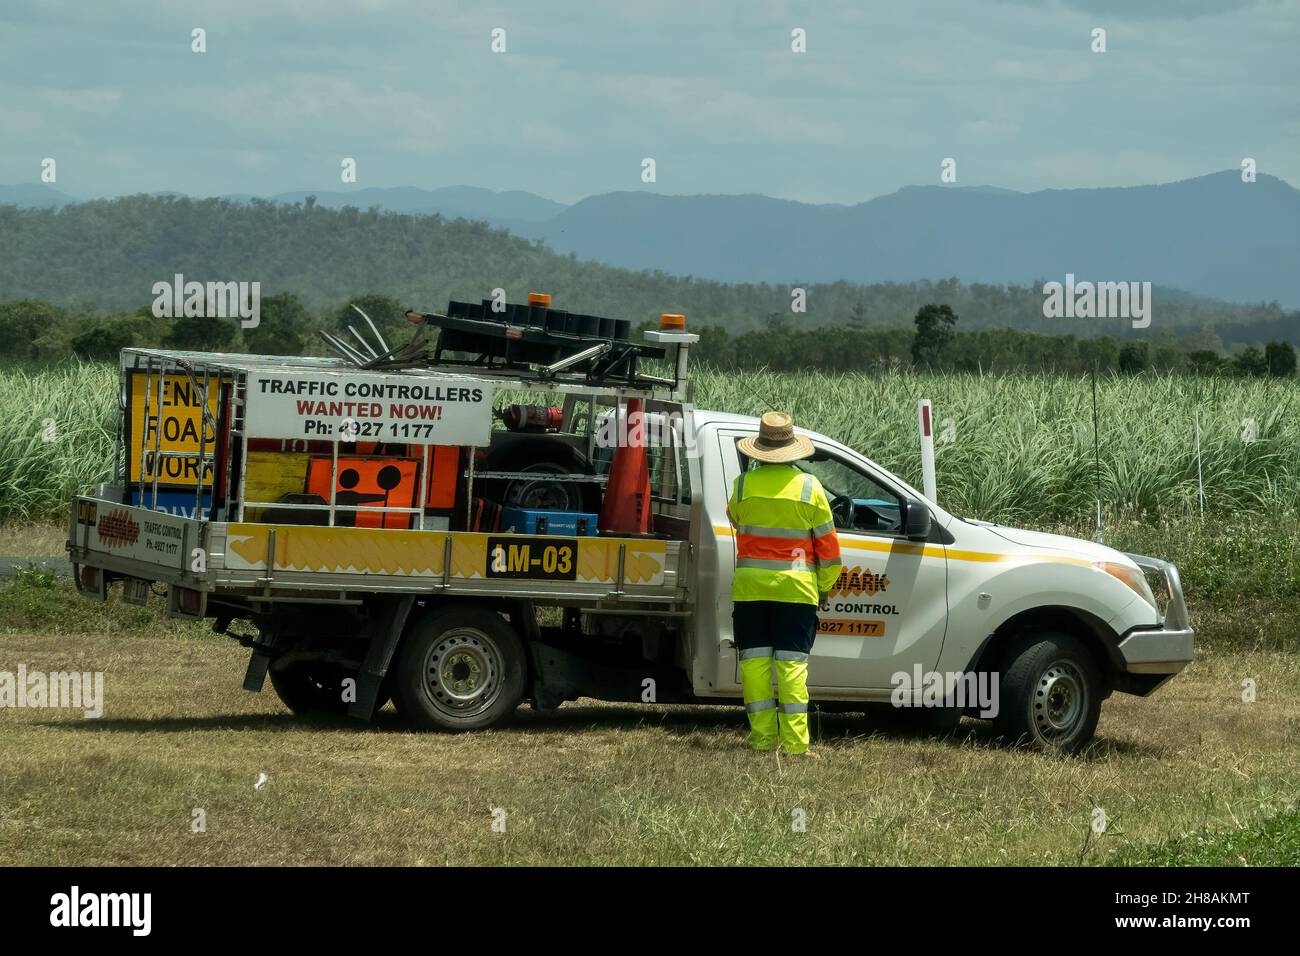 Bruce Highway, Townsville to Mackay, Queensland, Australia - November 2021: Traffic controller vehicle with worker on roadside in front of sugarcane c Stock Photo